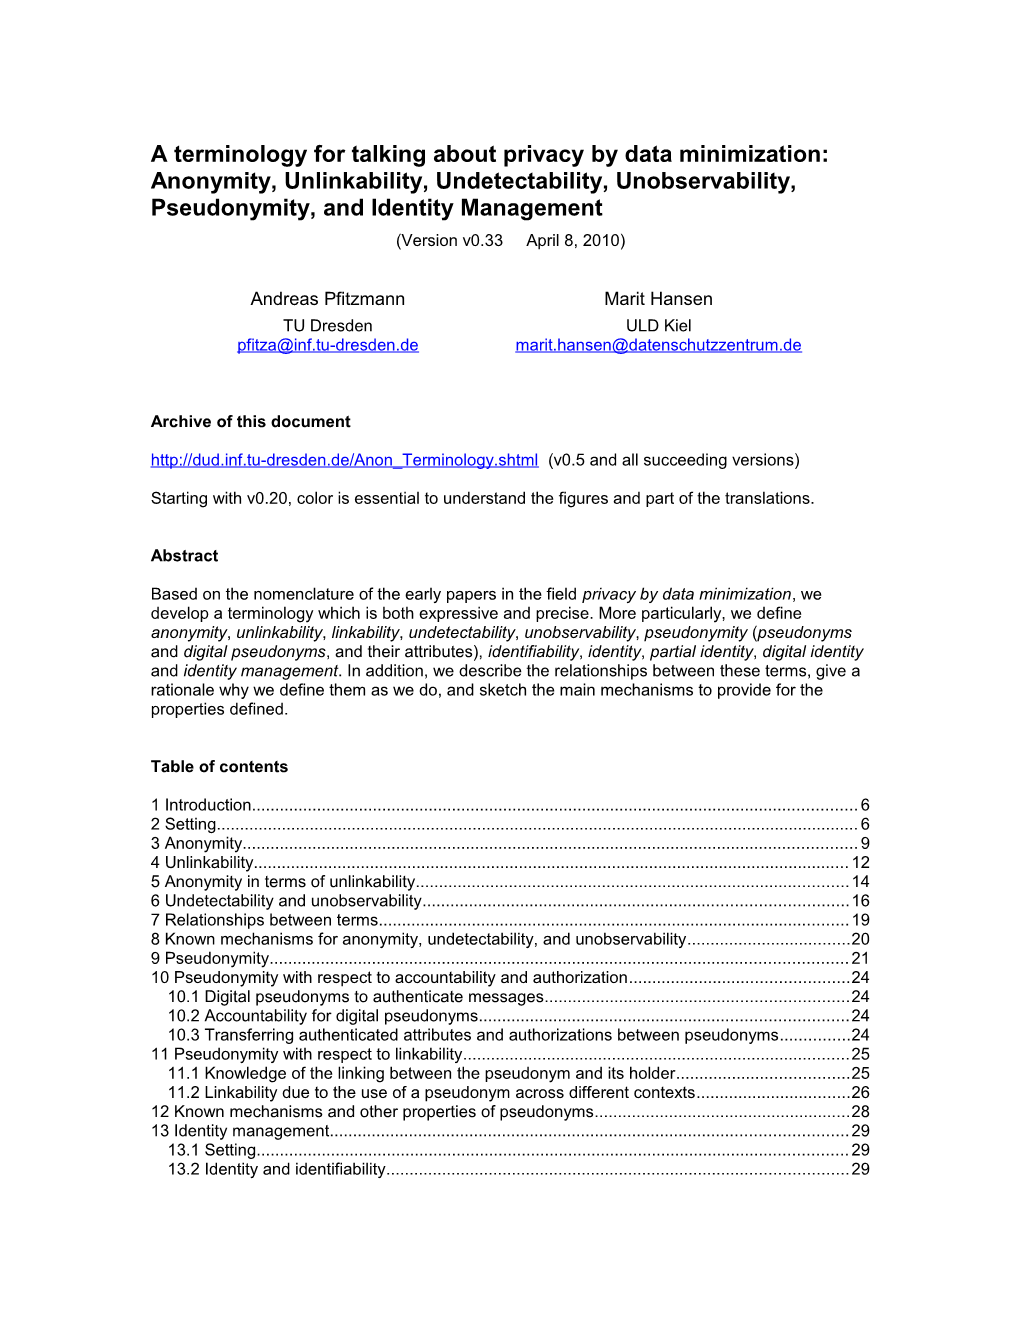 Anonymity, Unlinkability, Unobservability, Pseudonymity, and Identity Management a Consolidated